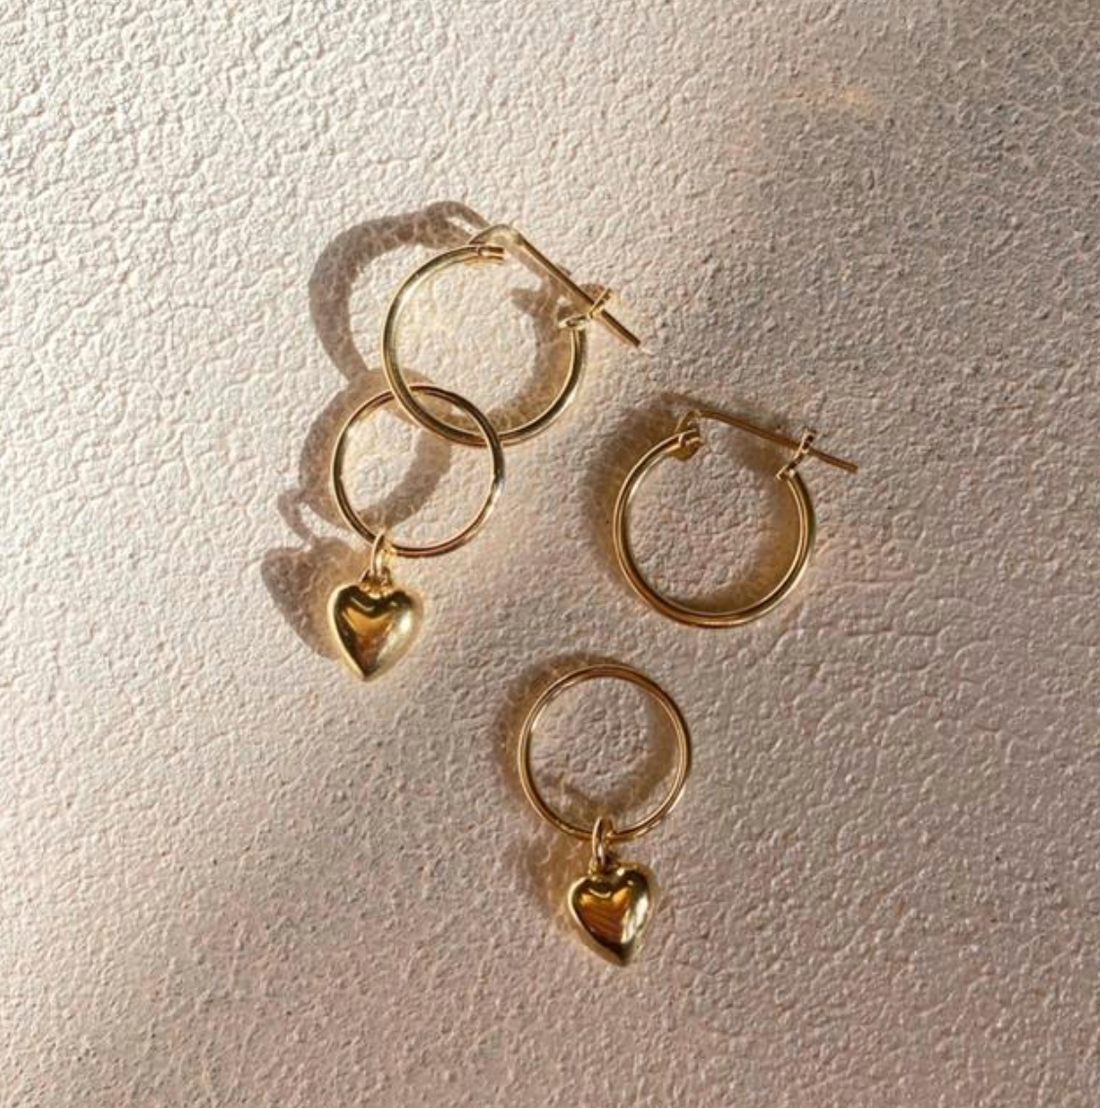 Double Ring Heart Hoops - Gold, Silver >>